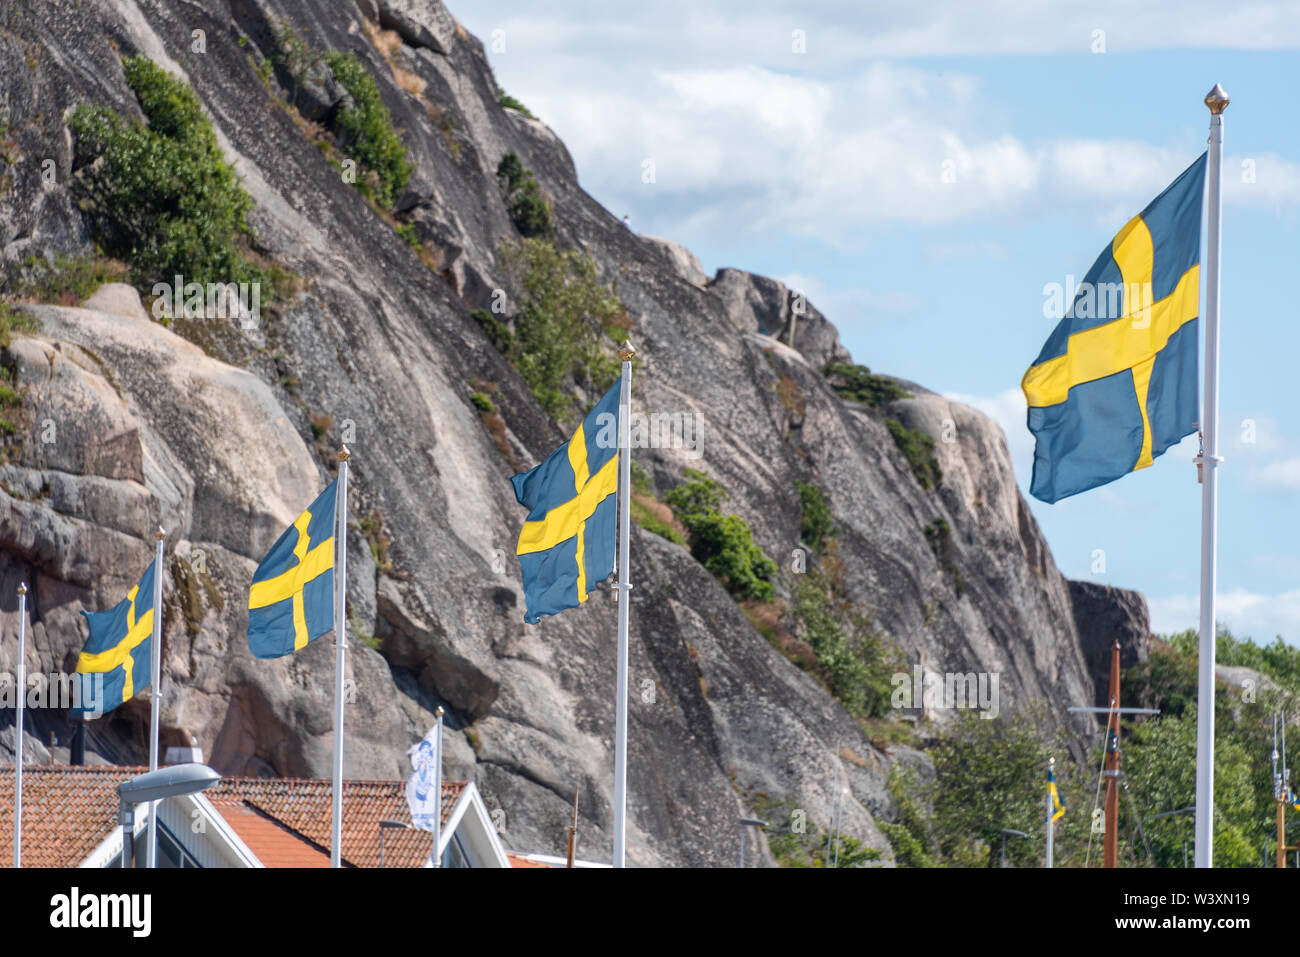 Grebbestad, Sweden - July 16, 2017: View of Swedish flags in the port of Grebbestad, Sweden. Stock Photo